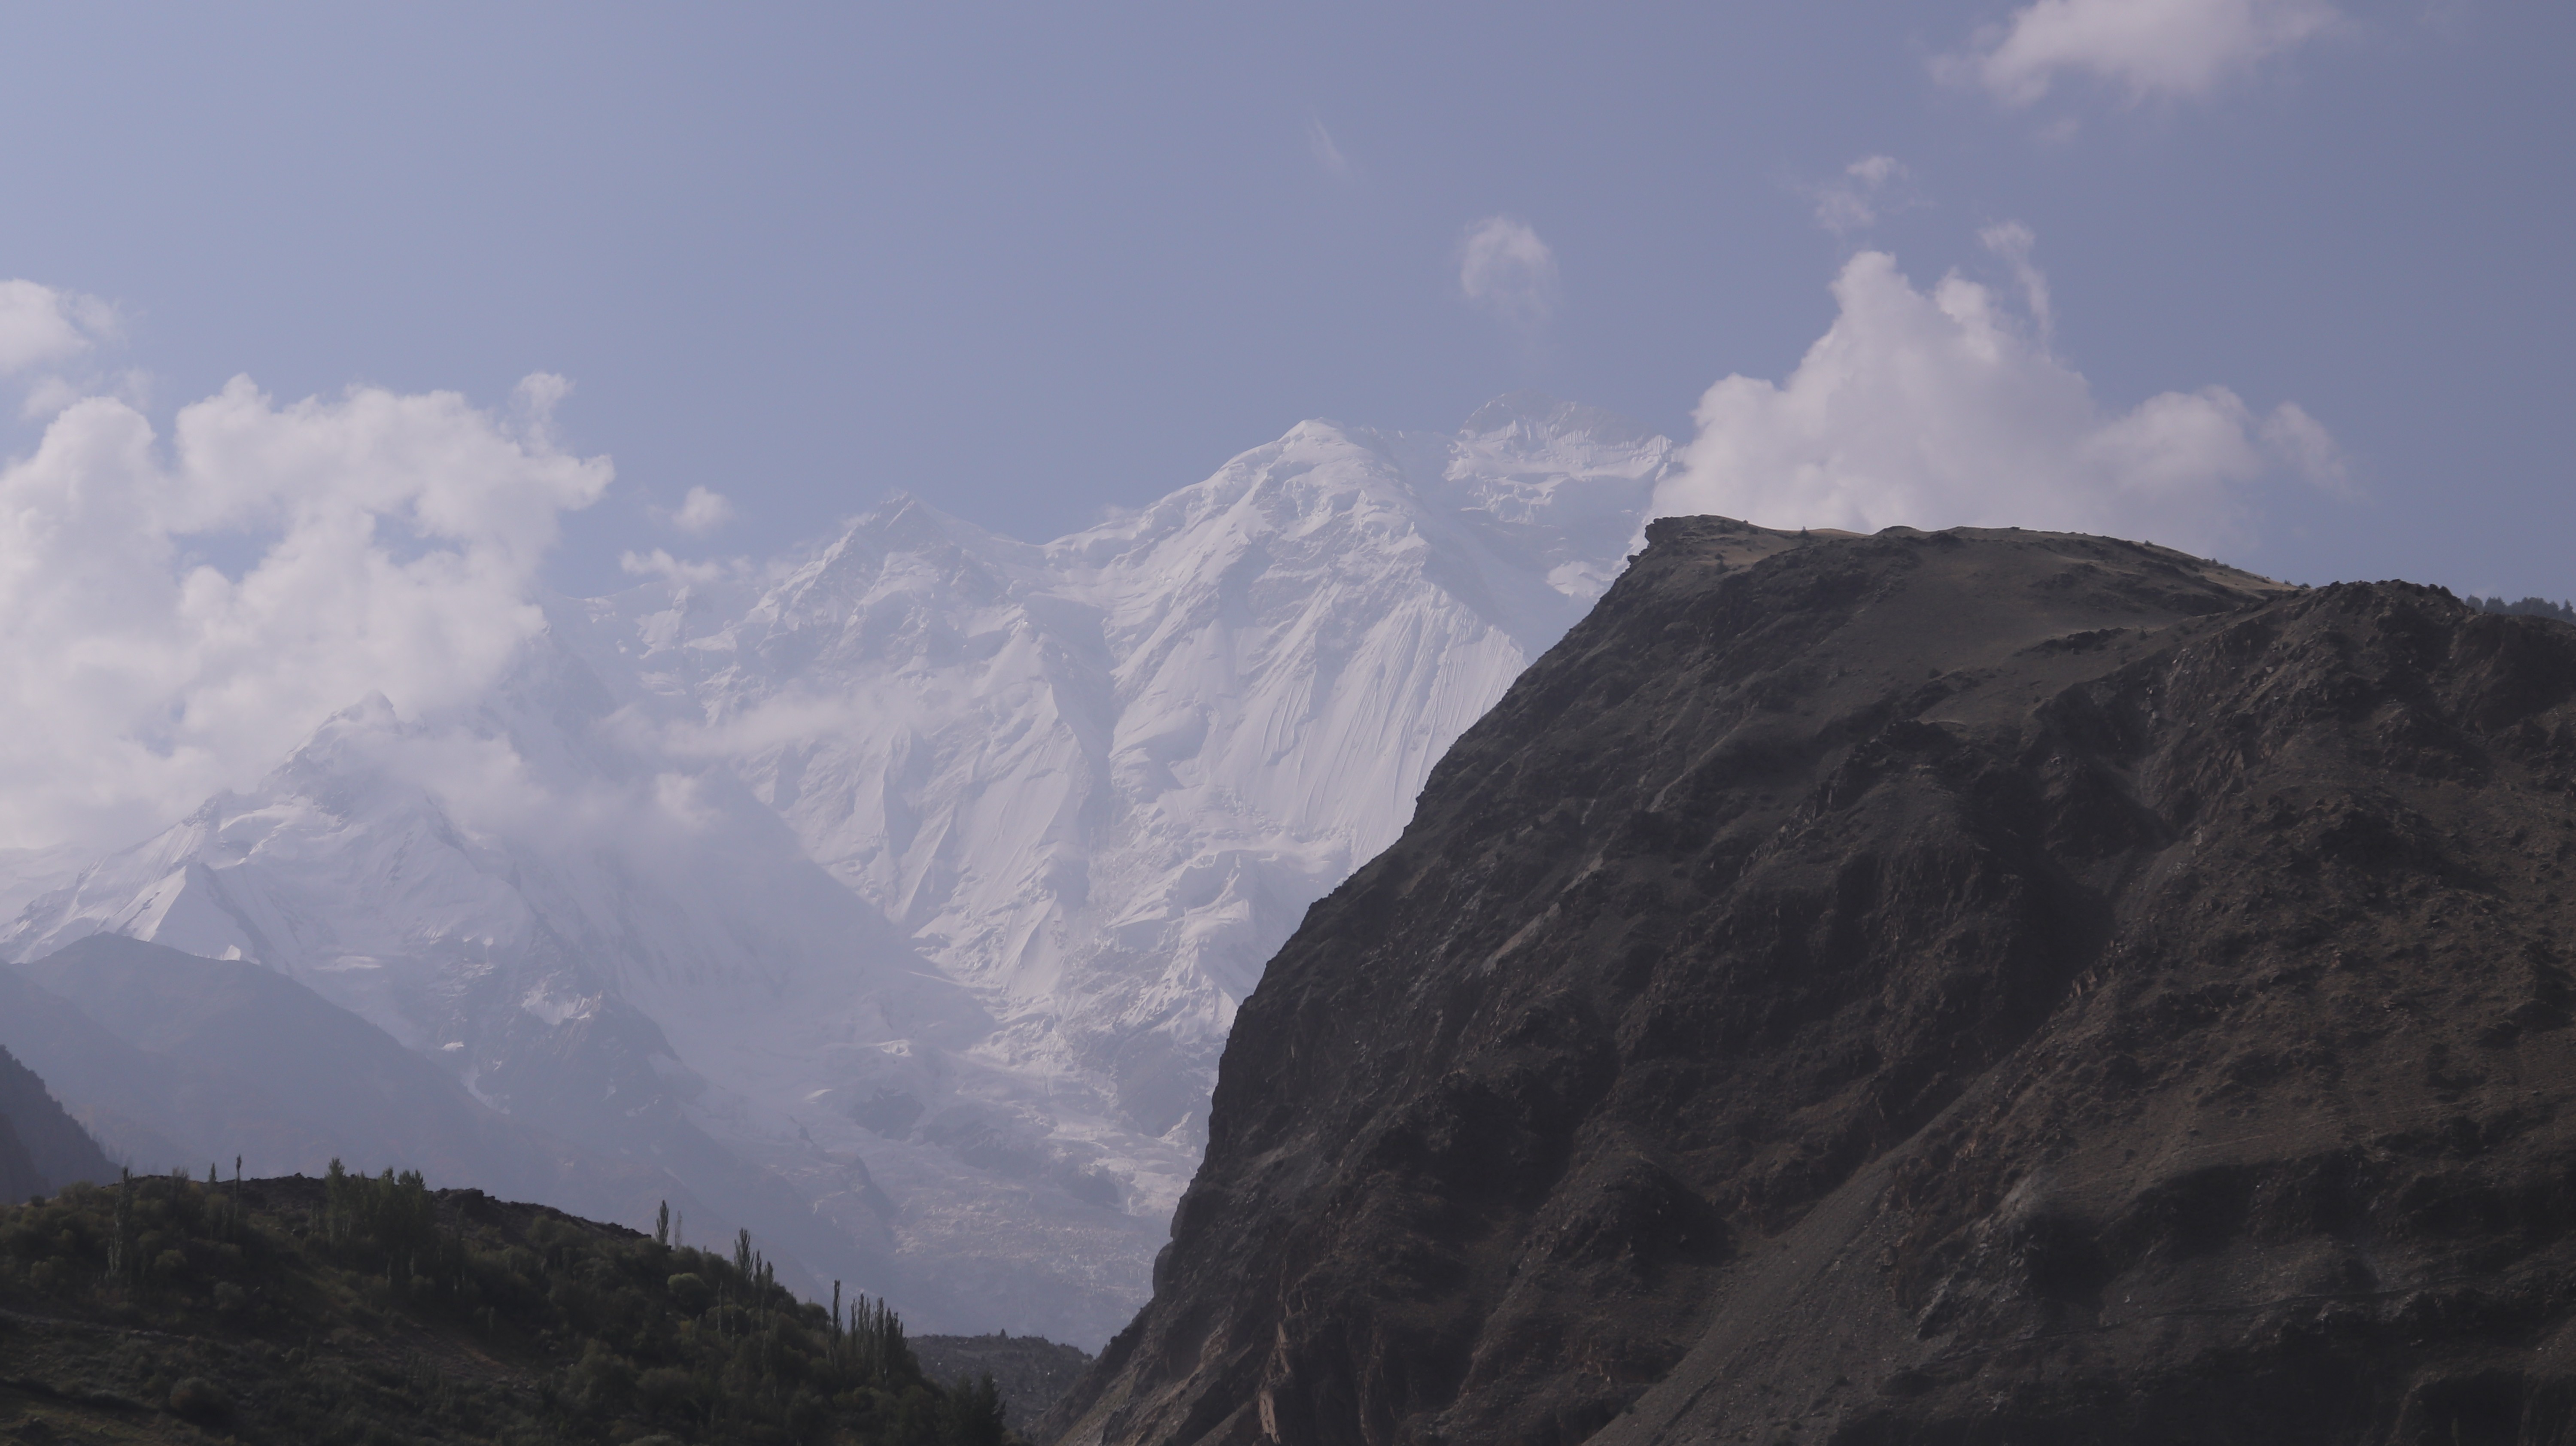 The scenic beauty of Nanga Parbat peak, The 2nd heighest Himalayan Peak in Pakistan and 8th heighest in the world